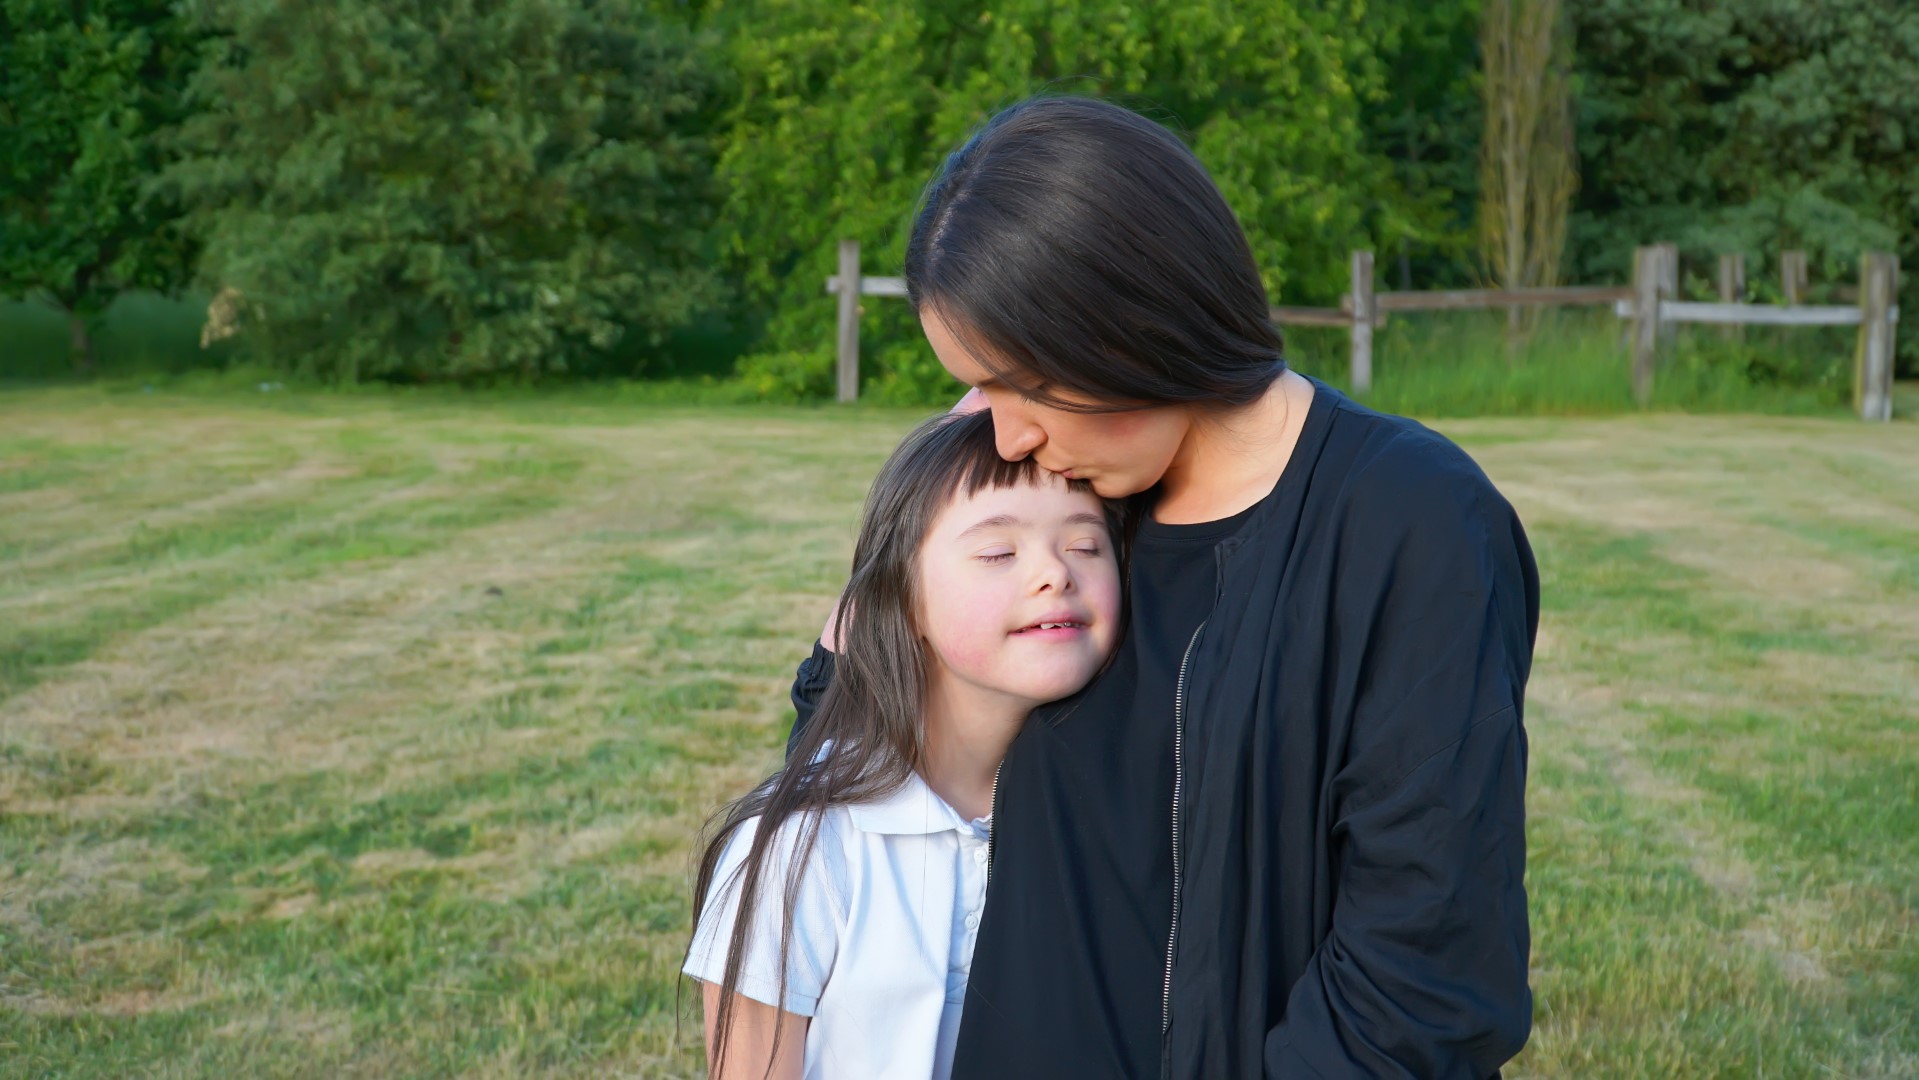 A carer hugs a child in a green outdoor space; the child has Down's syndrome.